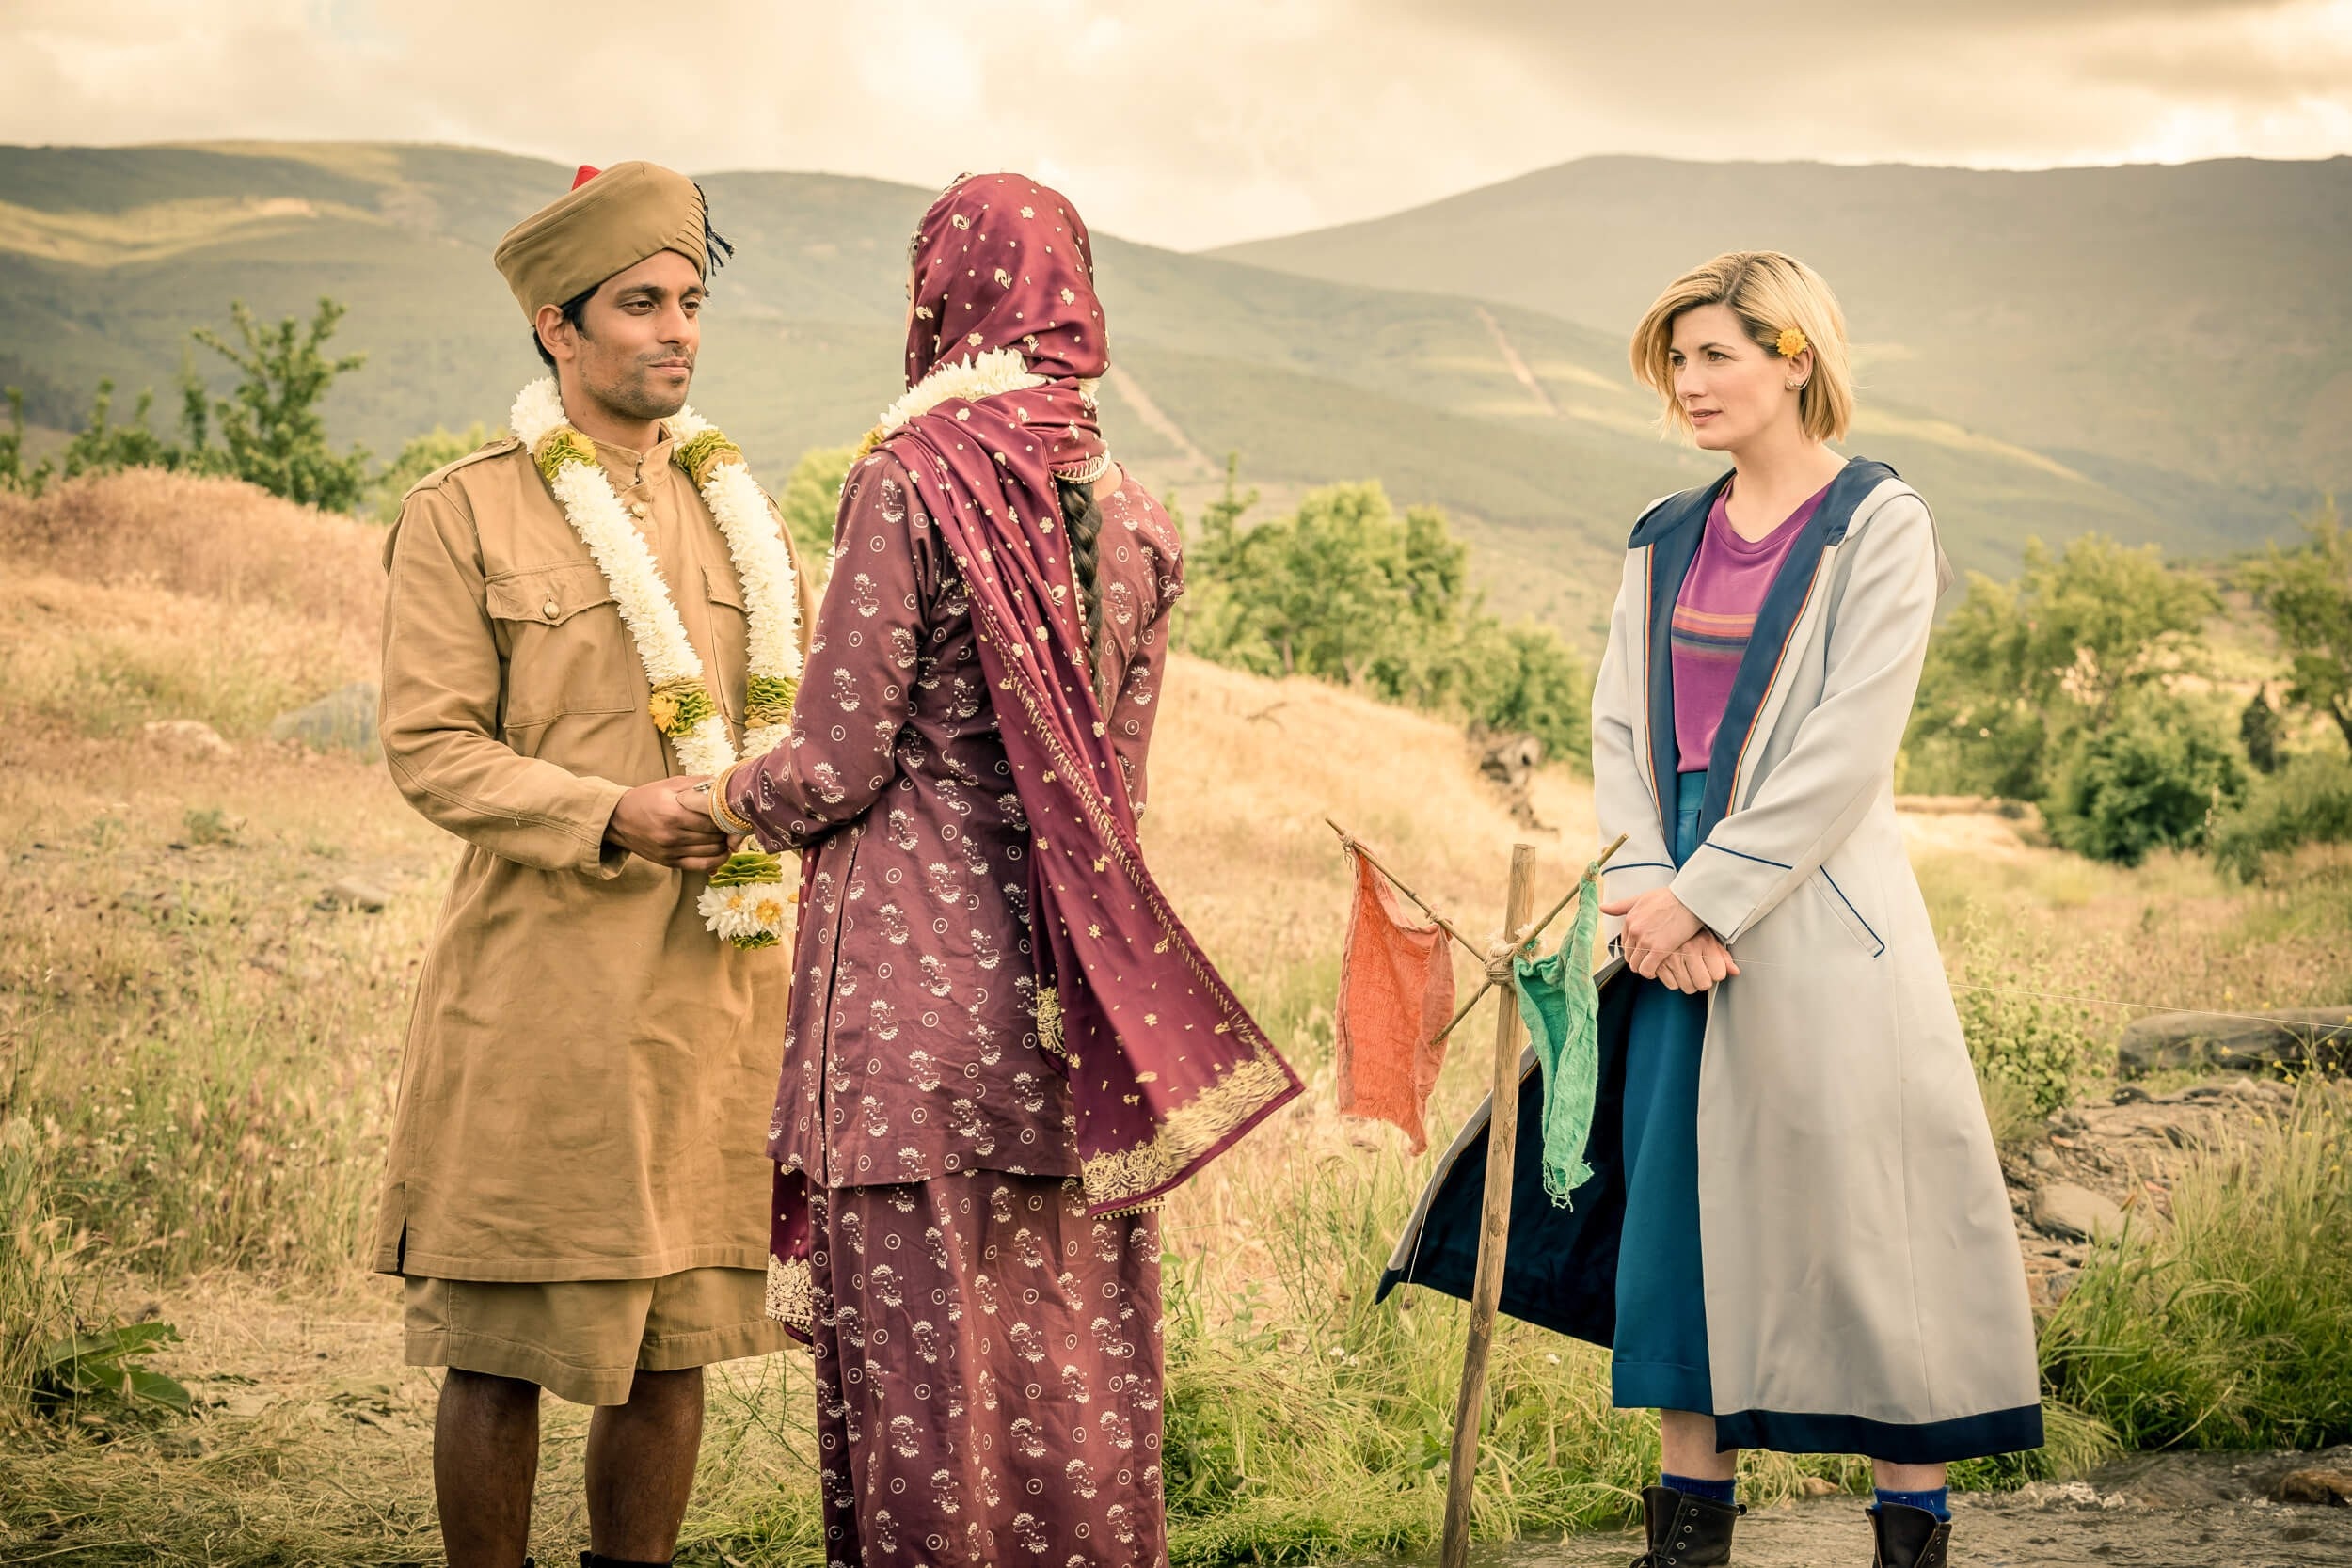 the thirteenth doctor (jodie whittaker) at the wedding of prem (shane zaza) and umbreen (amita suman) in demons of the punjab (2018).